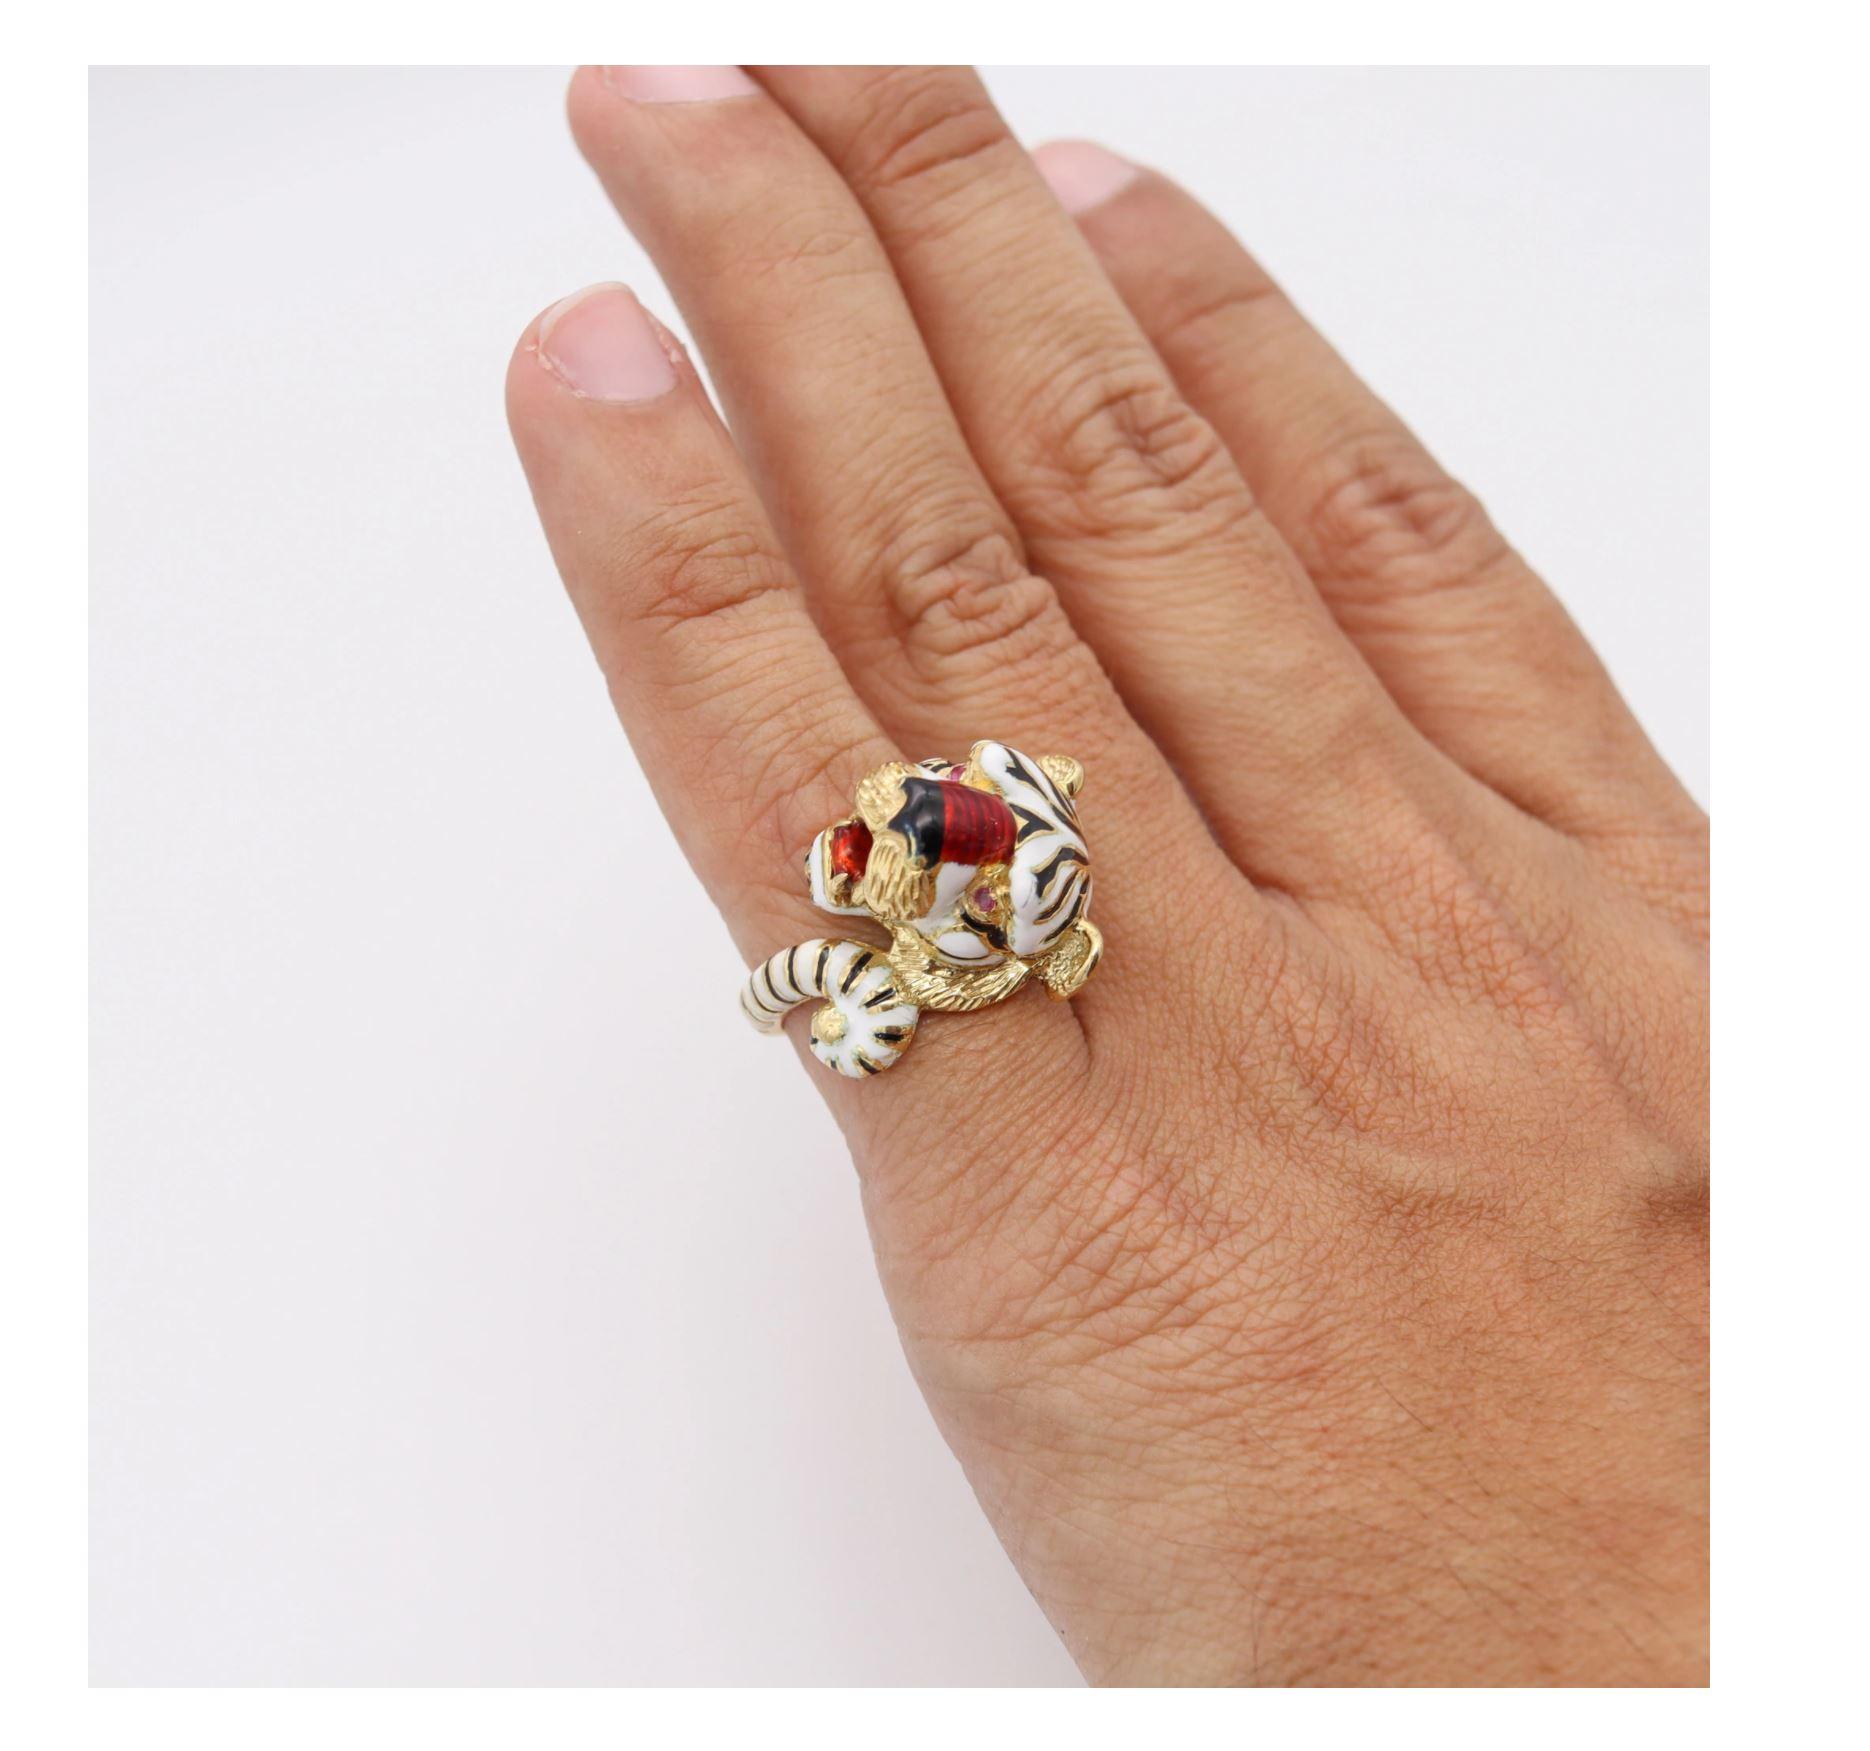 Women's Frascarolo Milano Enameled Tiger Cocktail Ring in 18Kt Yellow Gold with Rubies